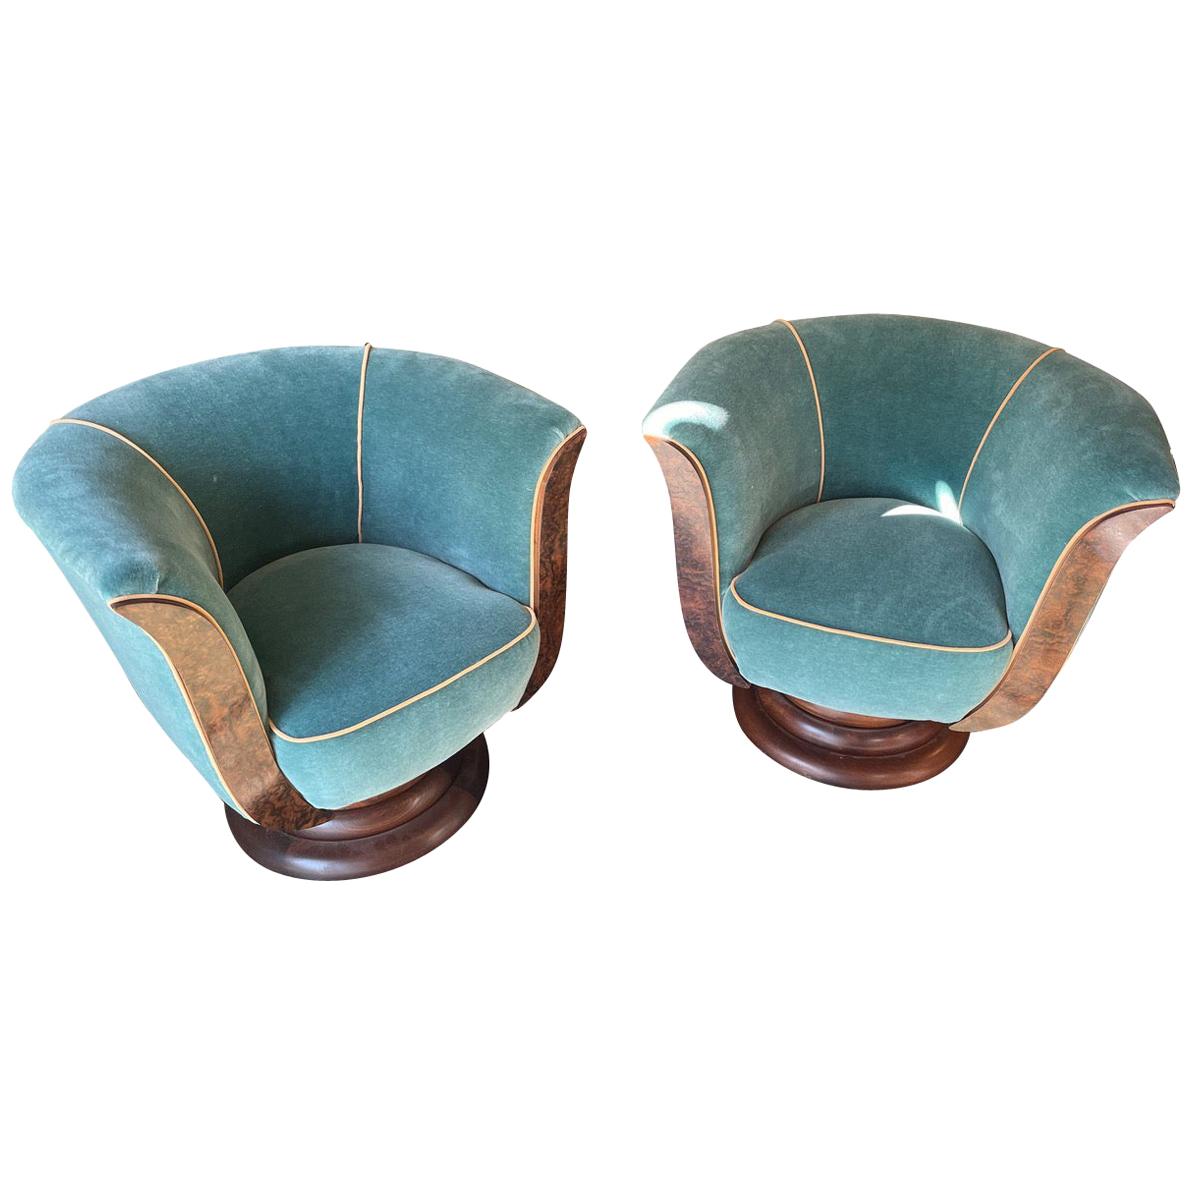 French Art Deco Tulip Swivel Chairs Mohair